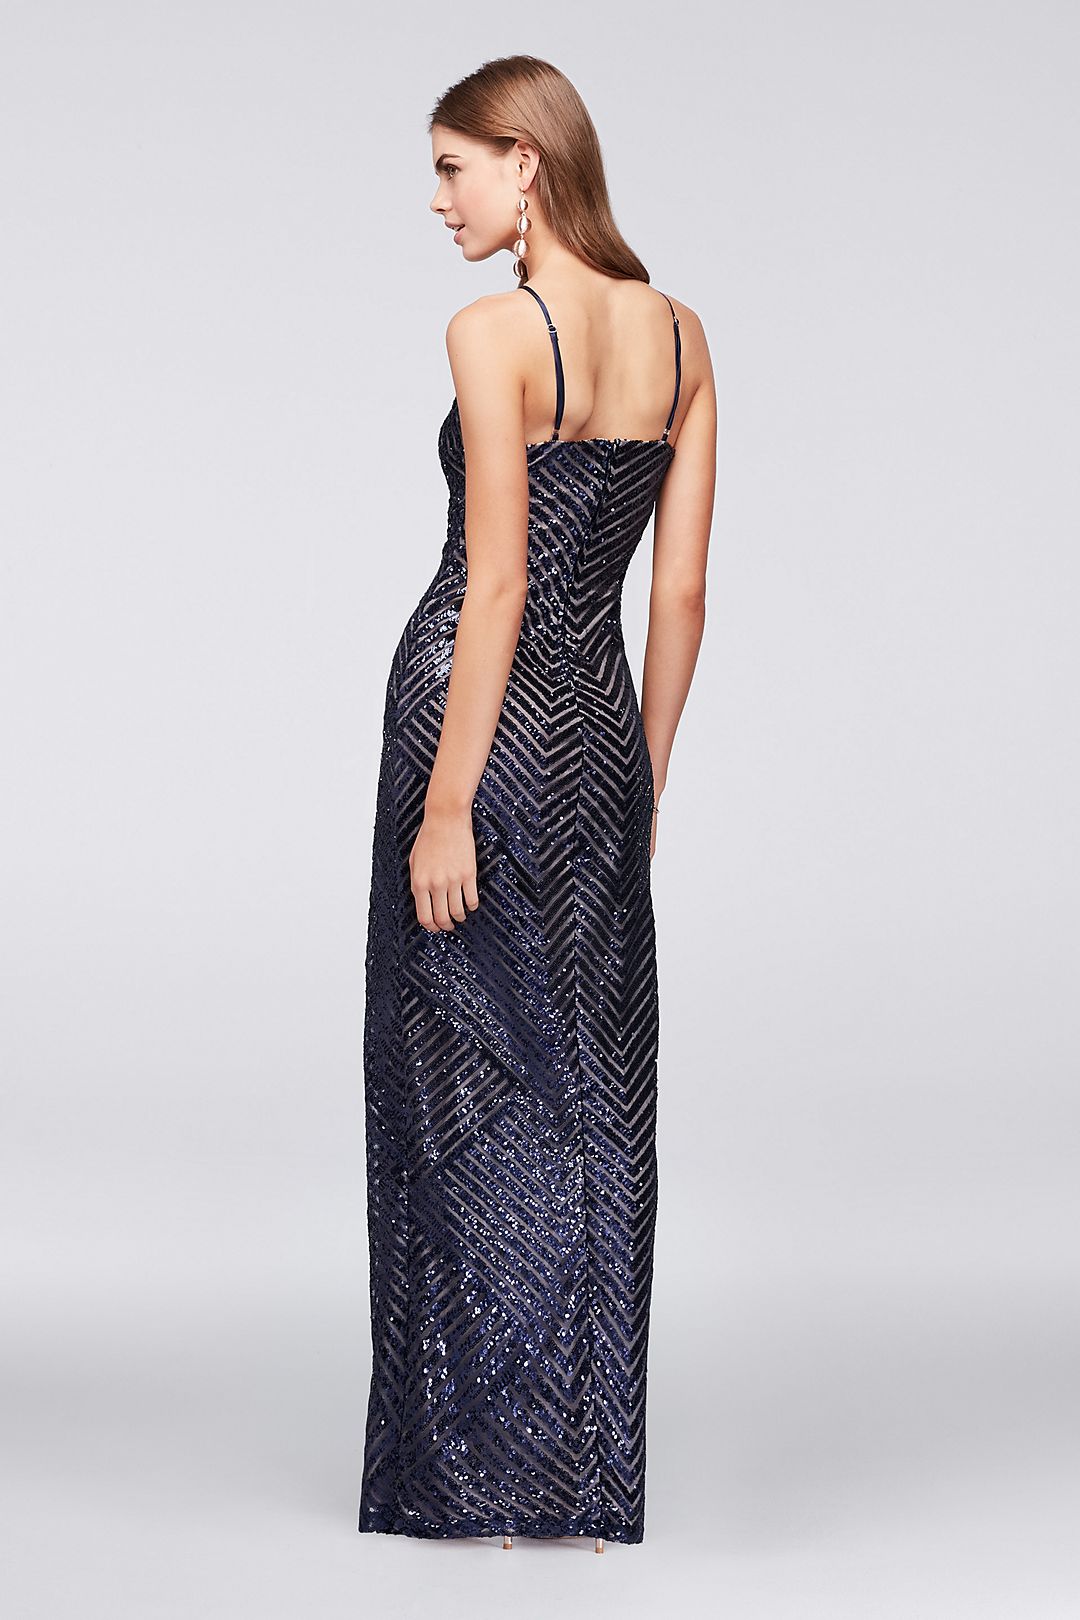 Chevron Sequined High-Neck Sheath Gown Image 2